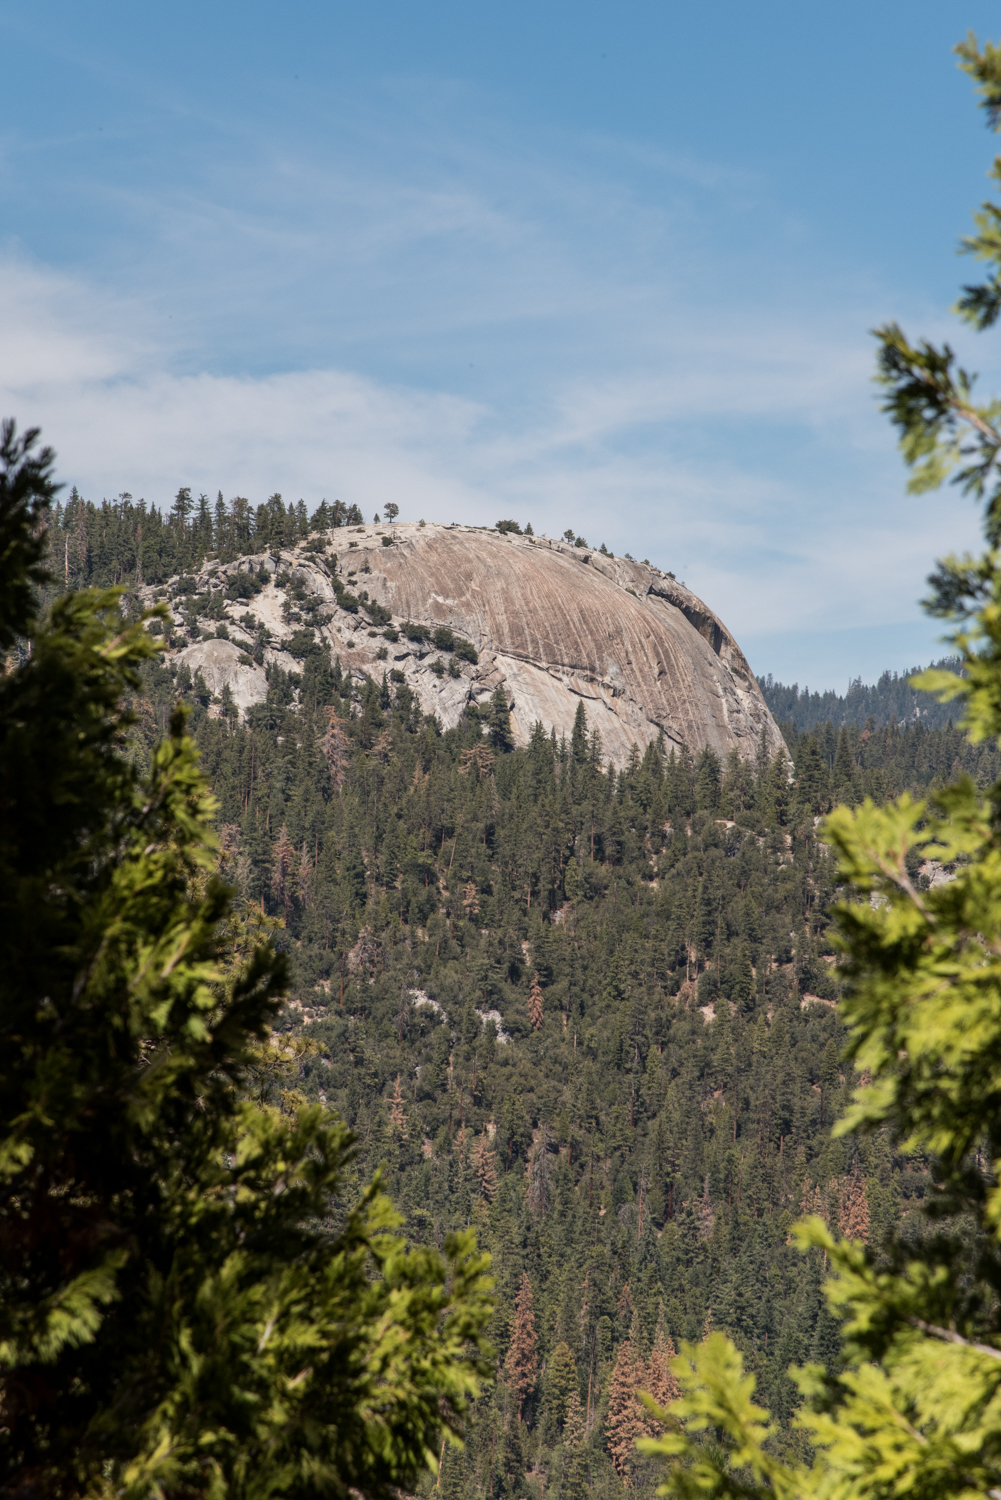  Dome Rock as seen from further along Hwy. 190. 